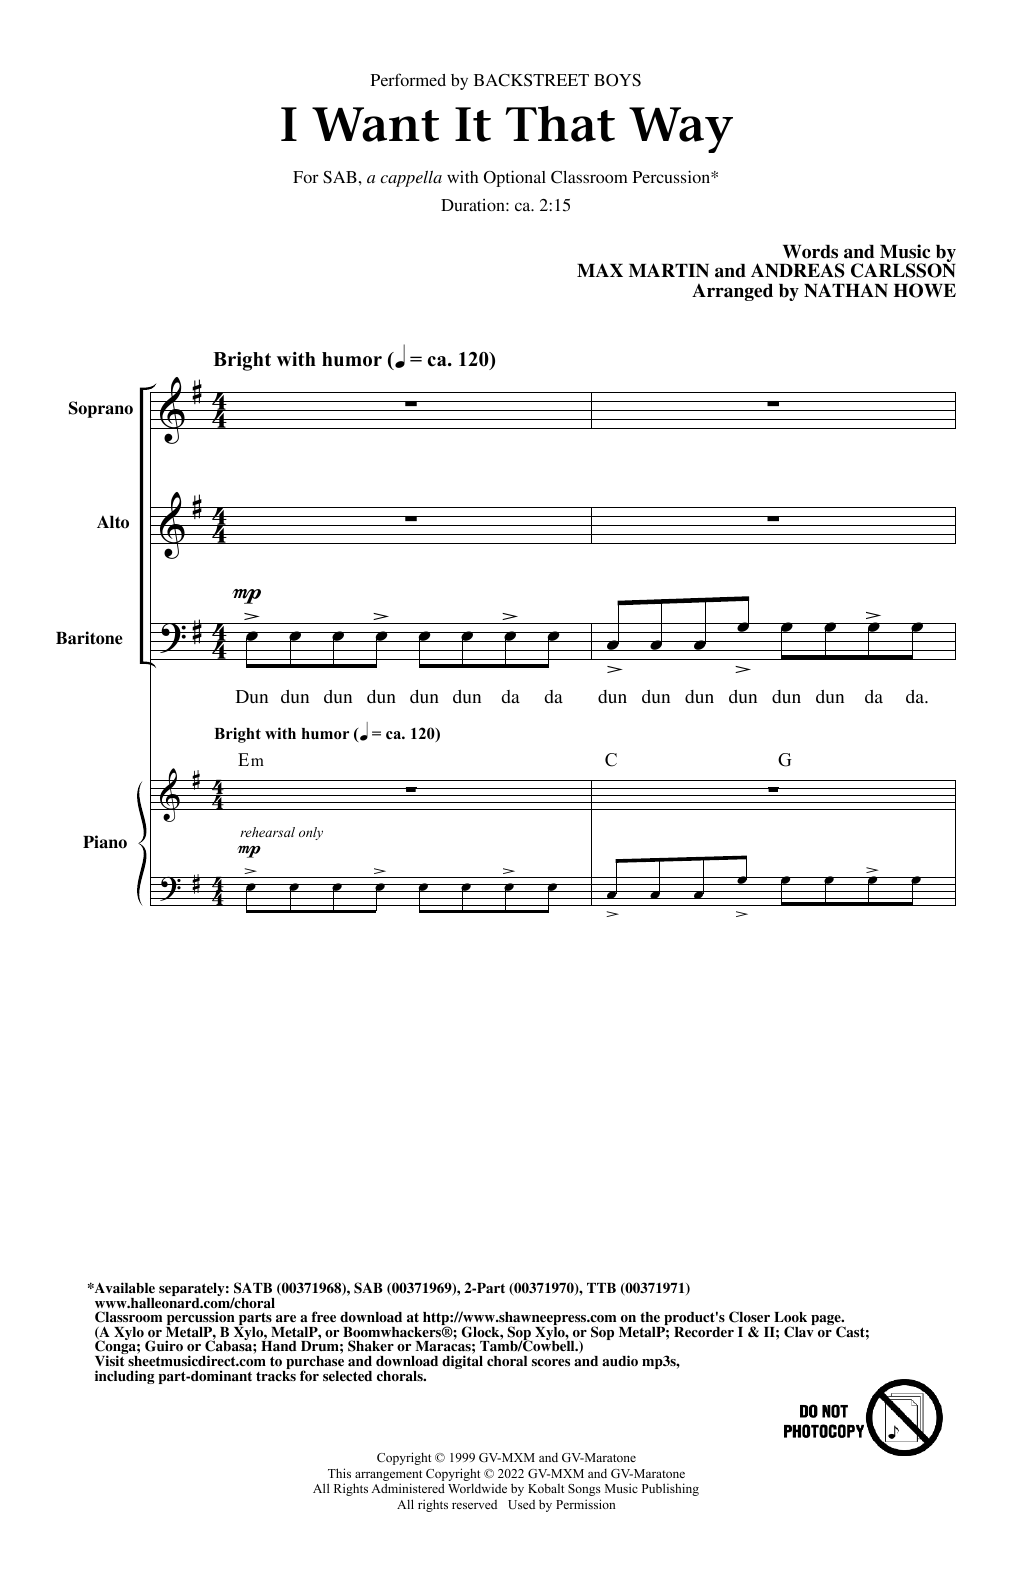 Download Backstreet Boys I Want It That Way (arr. Nathan Howe) Sheet Music